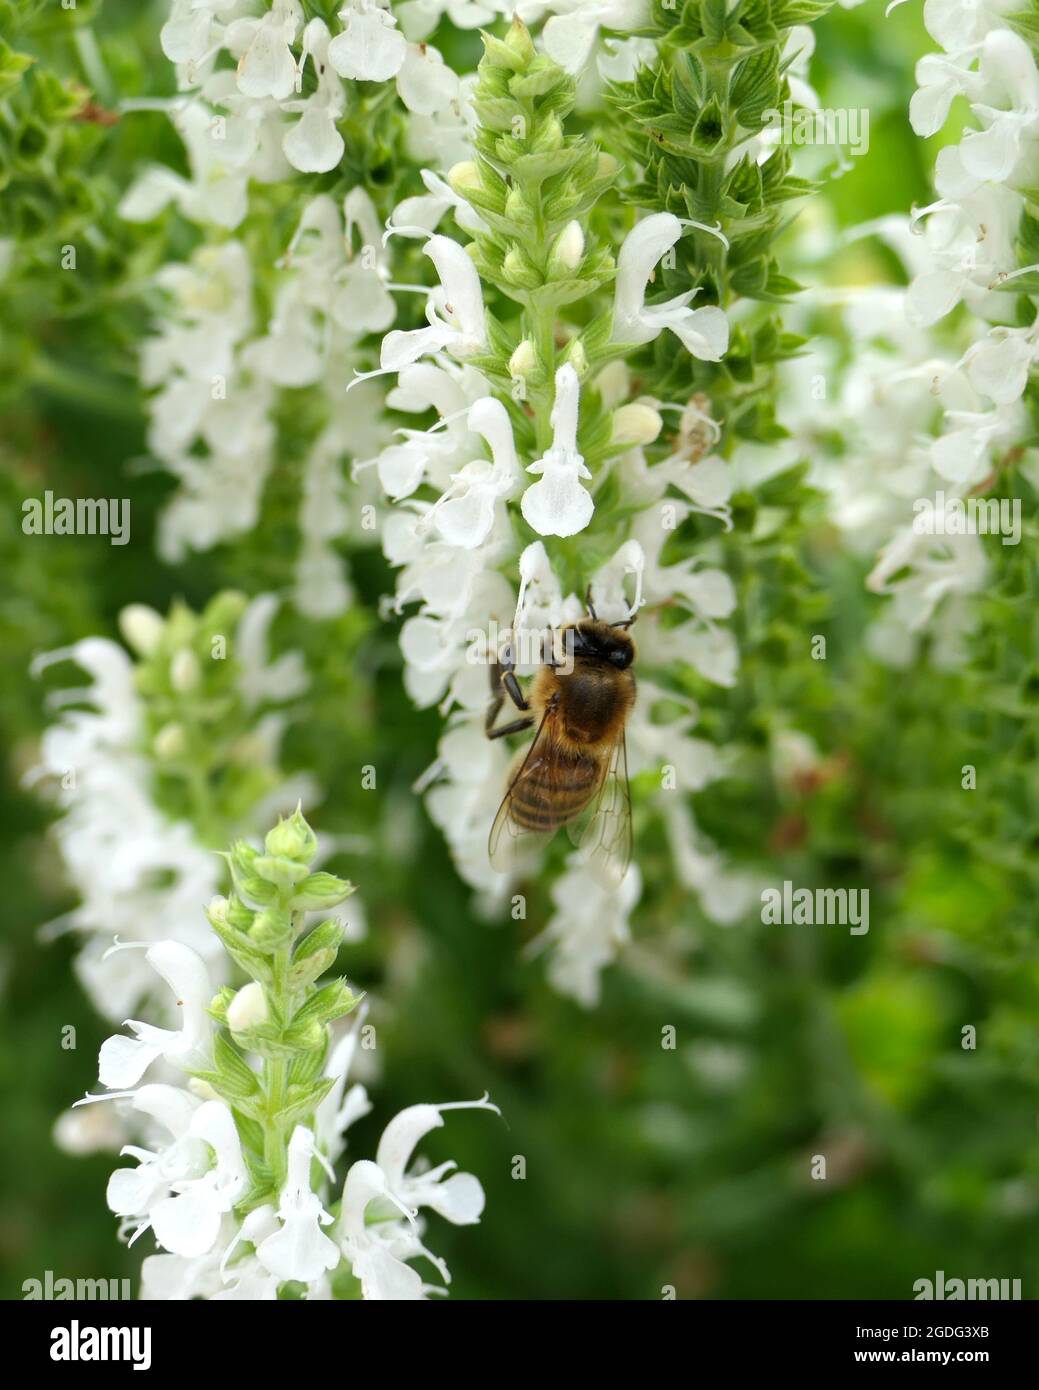 A honeybee gathering pollen and nectar from the white flowers of Salvia nemorosa 'Schneehugel', a type of ornamental sage Stock Photo